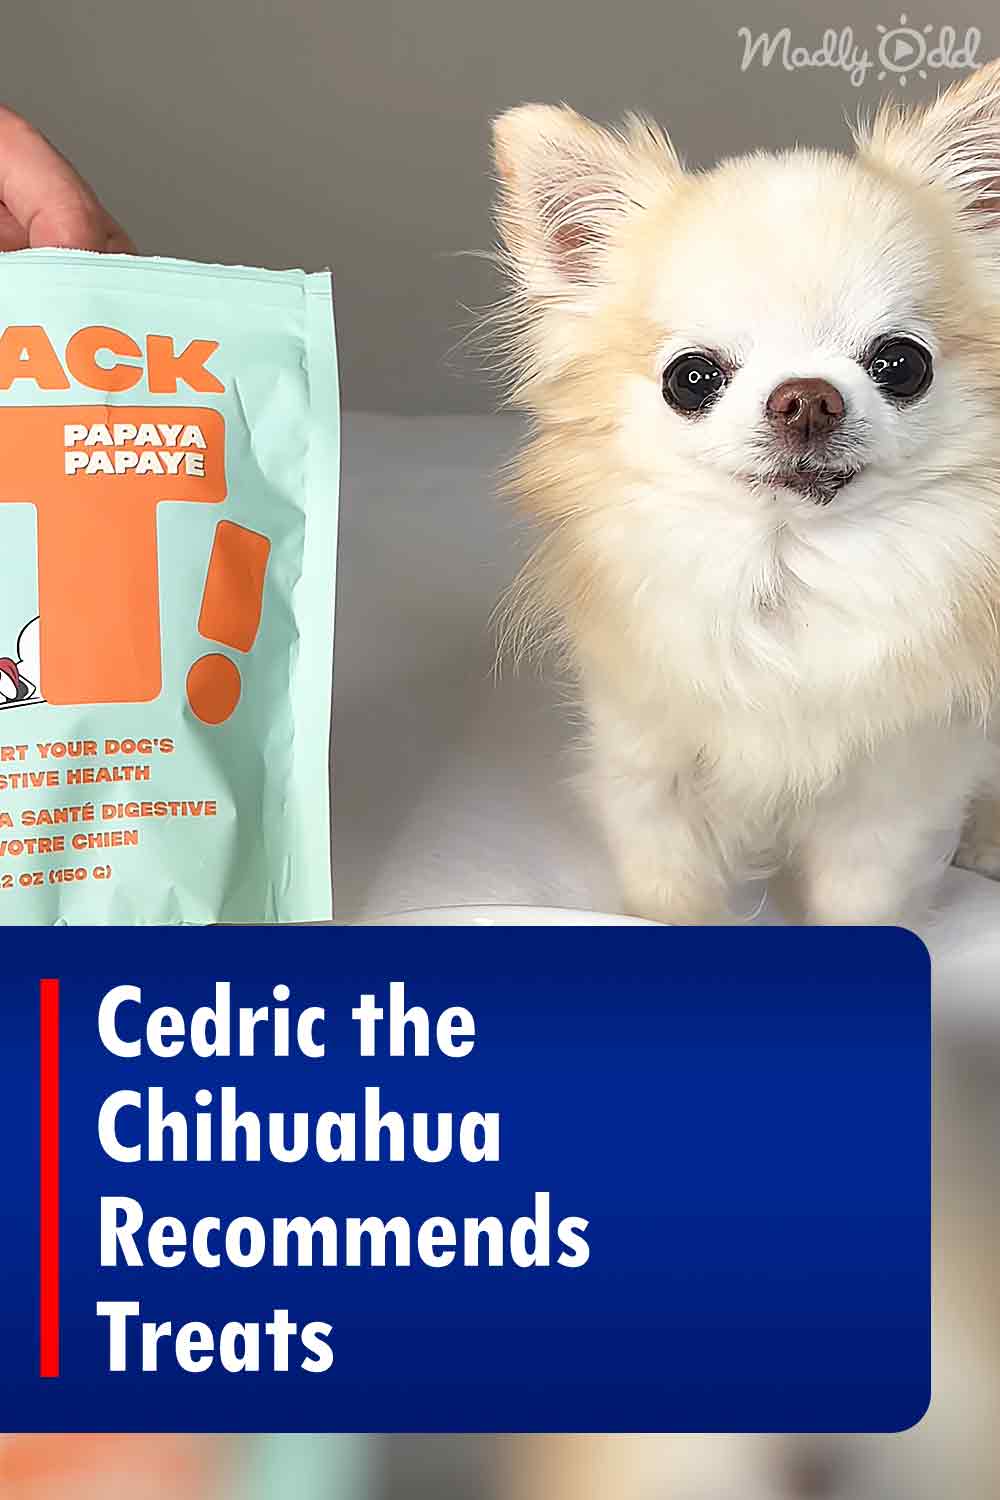 Cedric the Chihuahua Recommends Treats